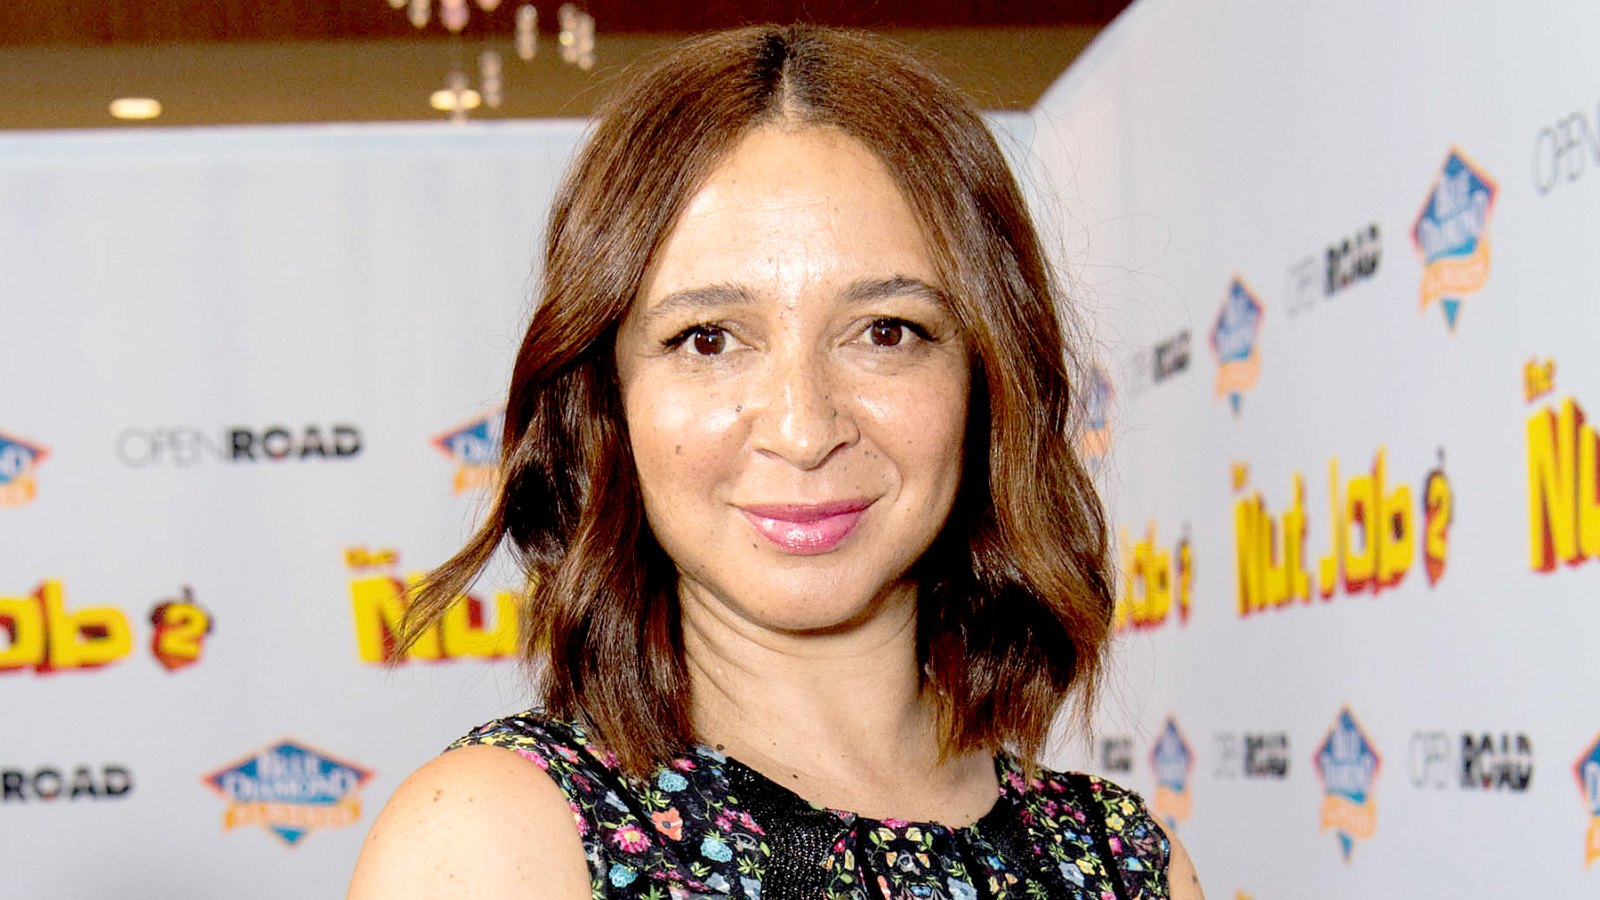 Maya Rudolph attends the premiere of Open Road Films' 'The Nut Job 2: Nutty by Nature' at Regal Cinemas L.A. Live on August 5, 2017 in Los Angeles, California.